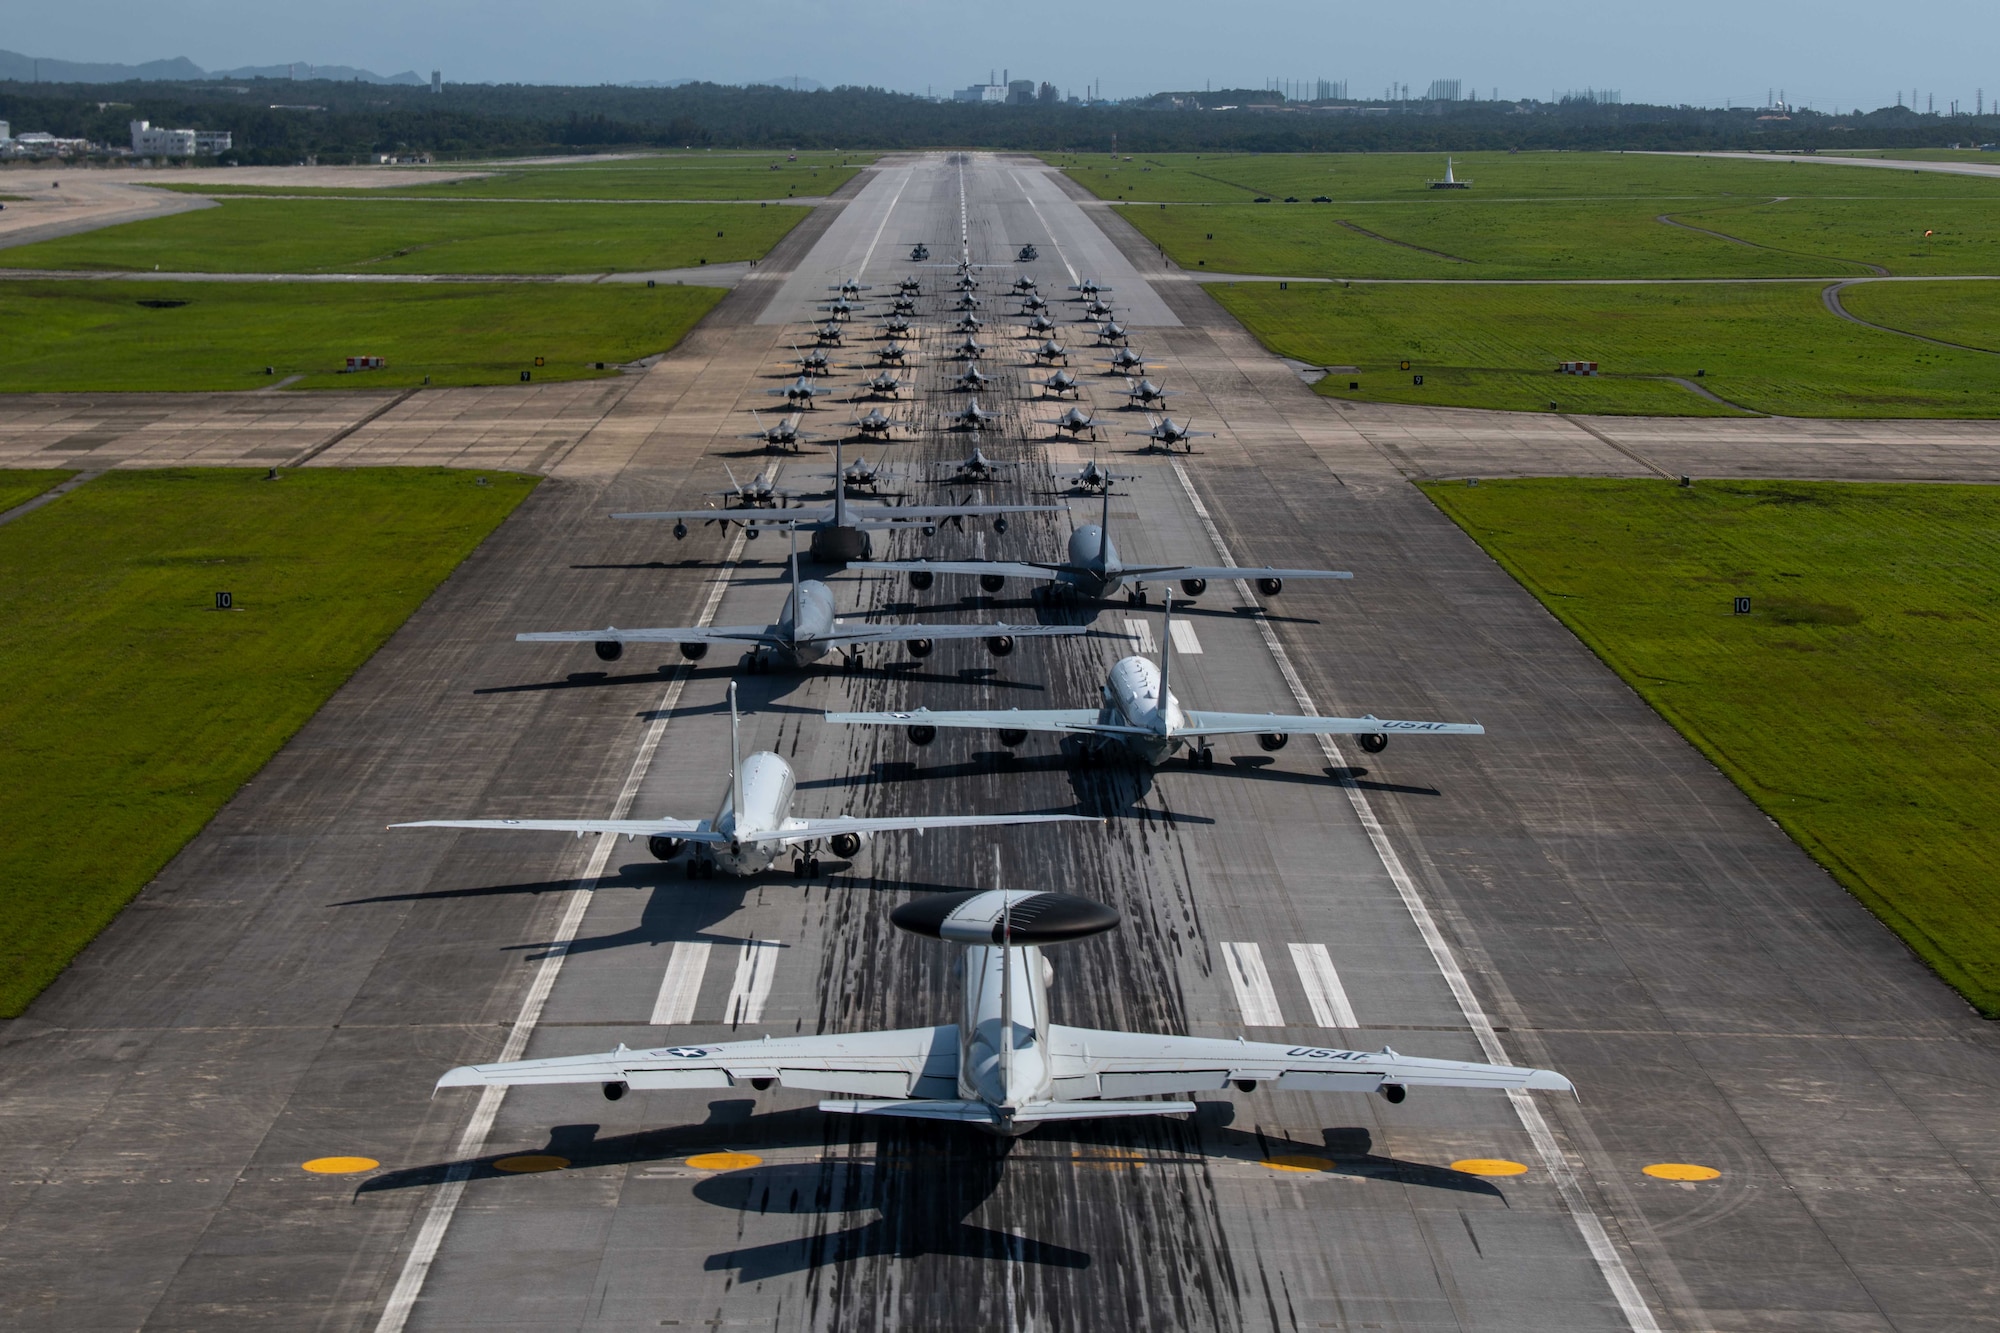 Many aircraft in formation on a runway